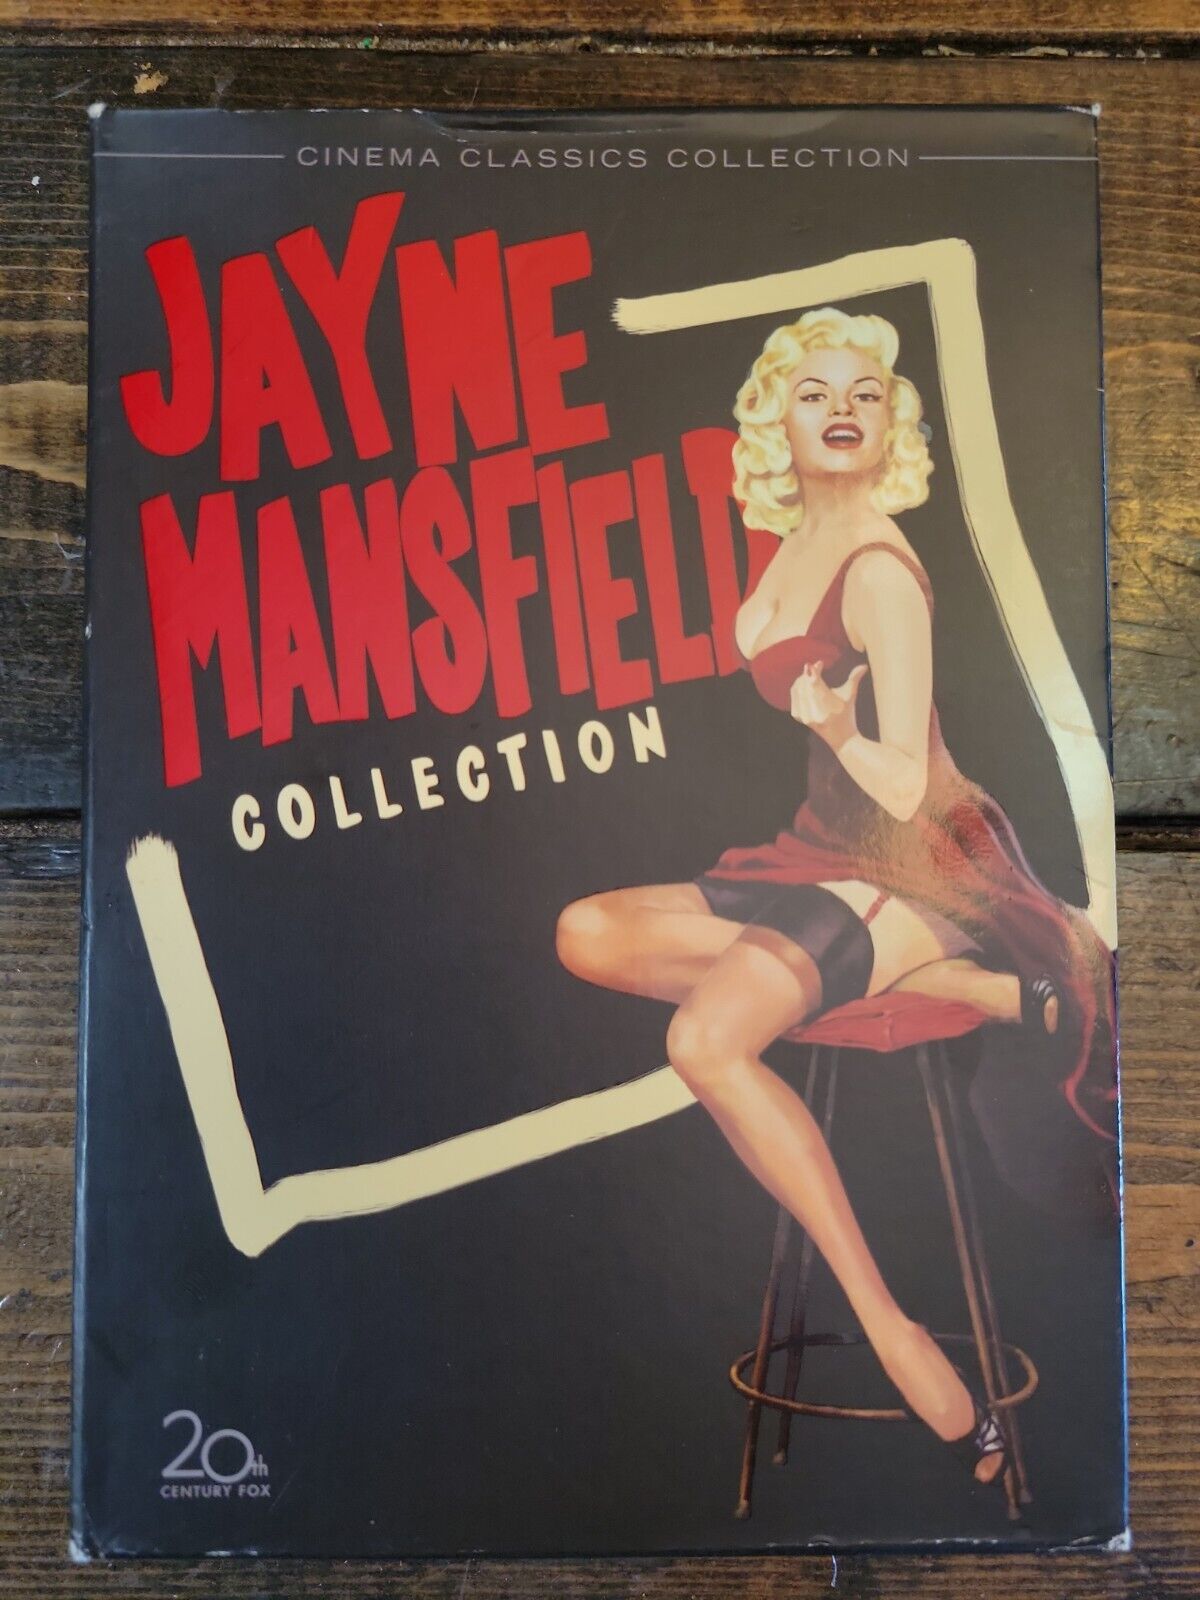 Jayne Mansfield Collection (DVD, 2006, 3-Disc Set)